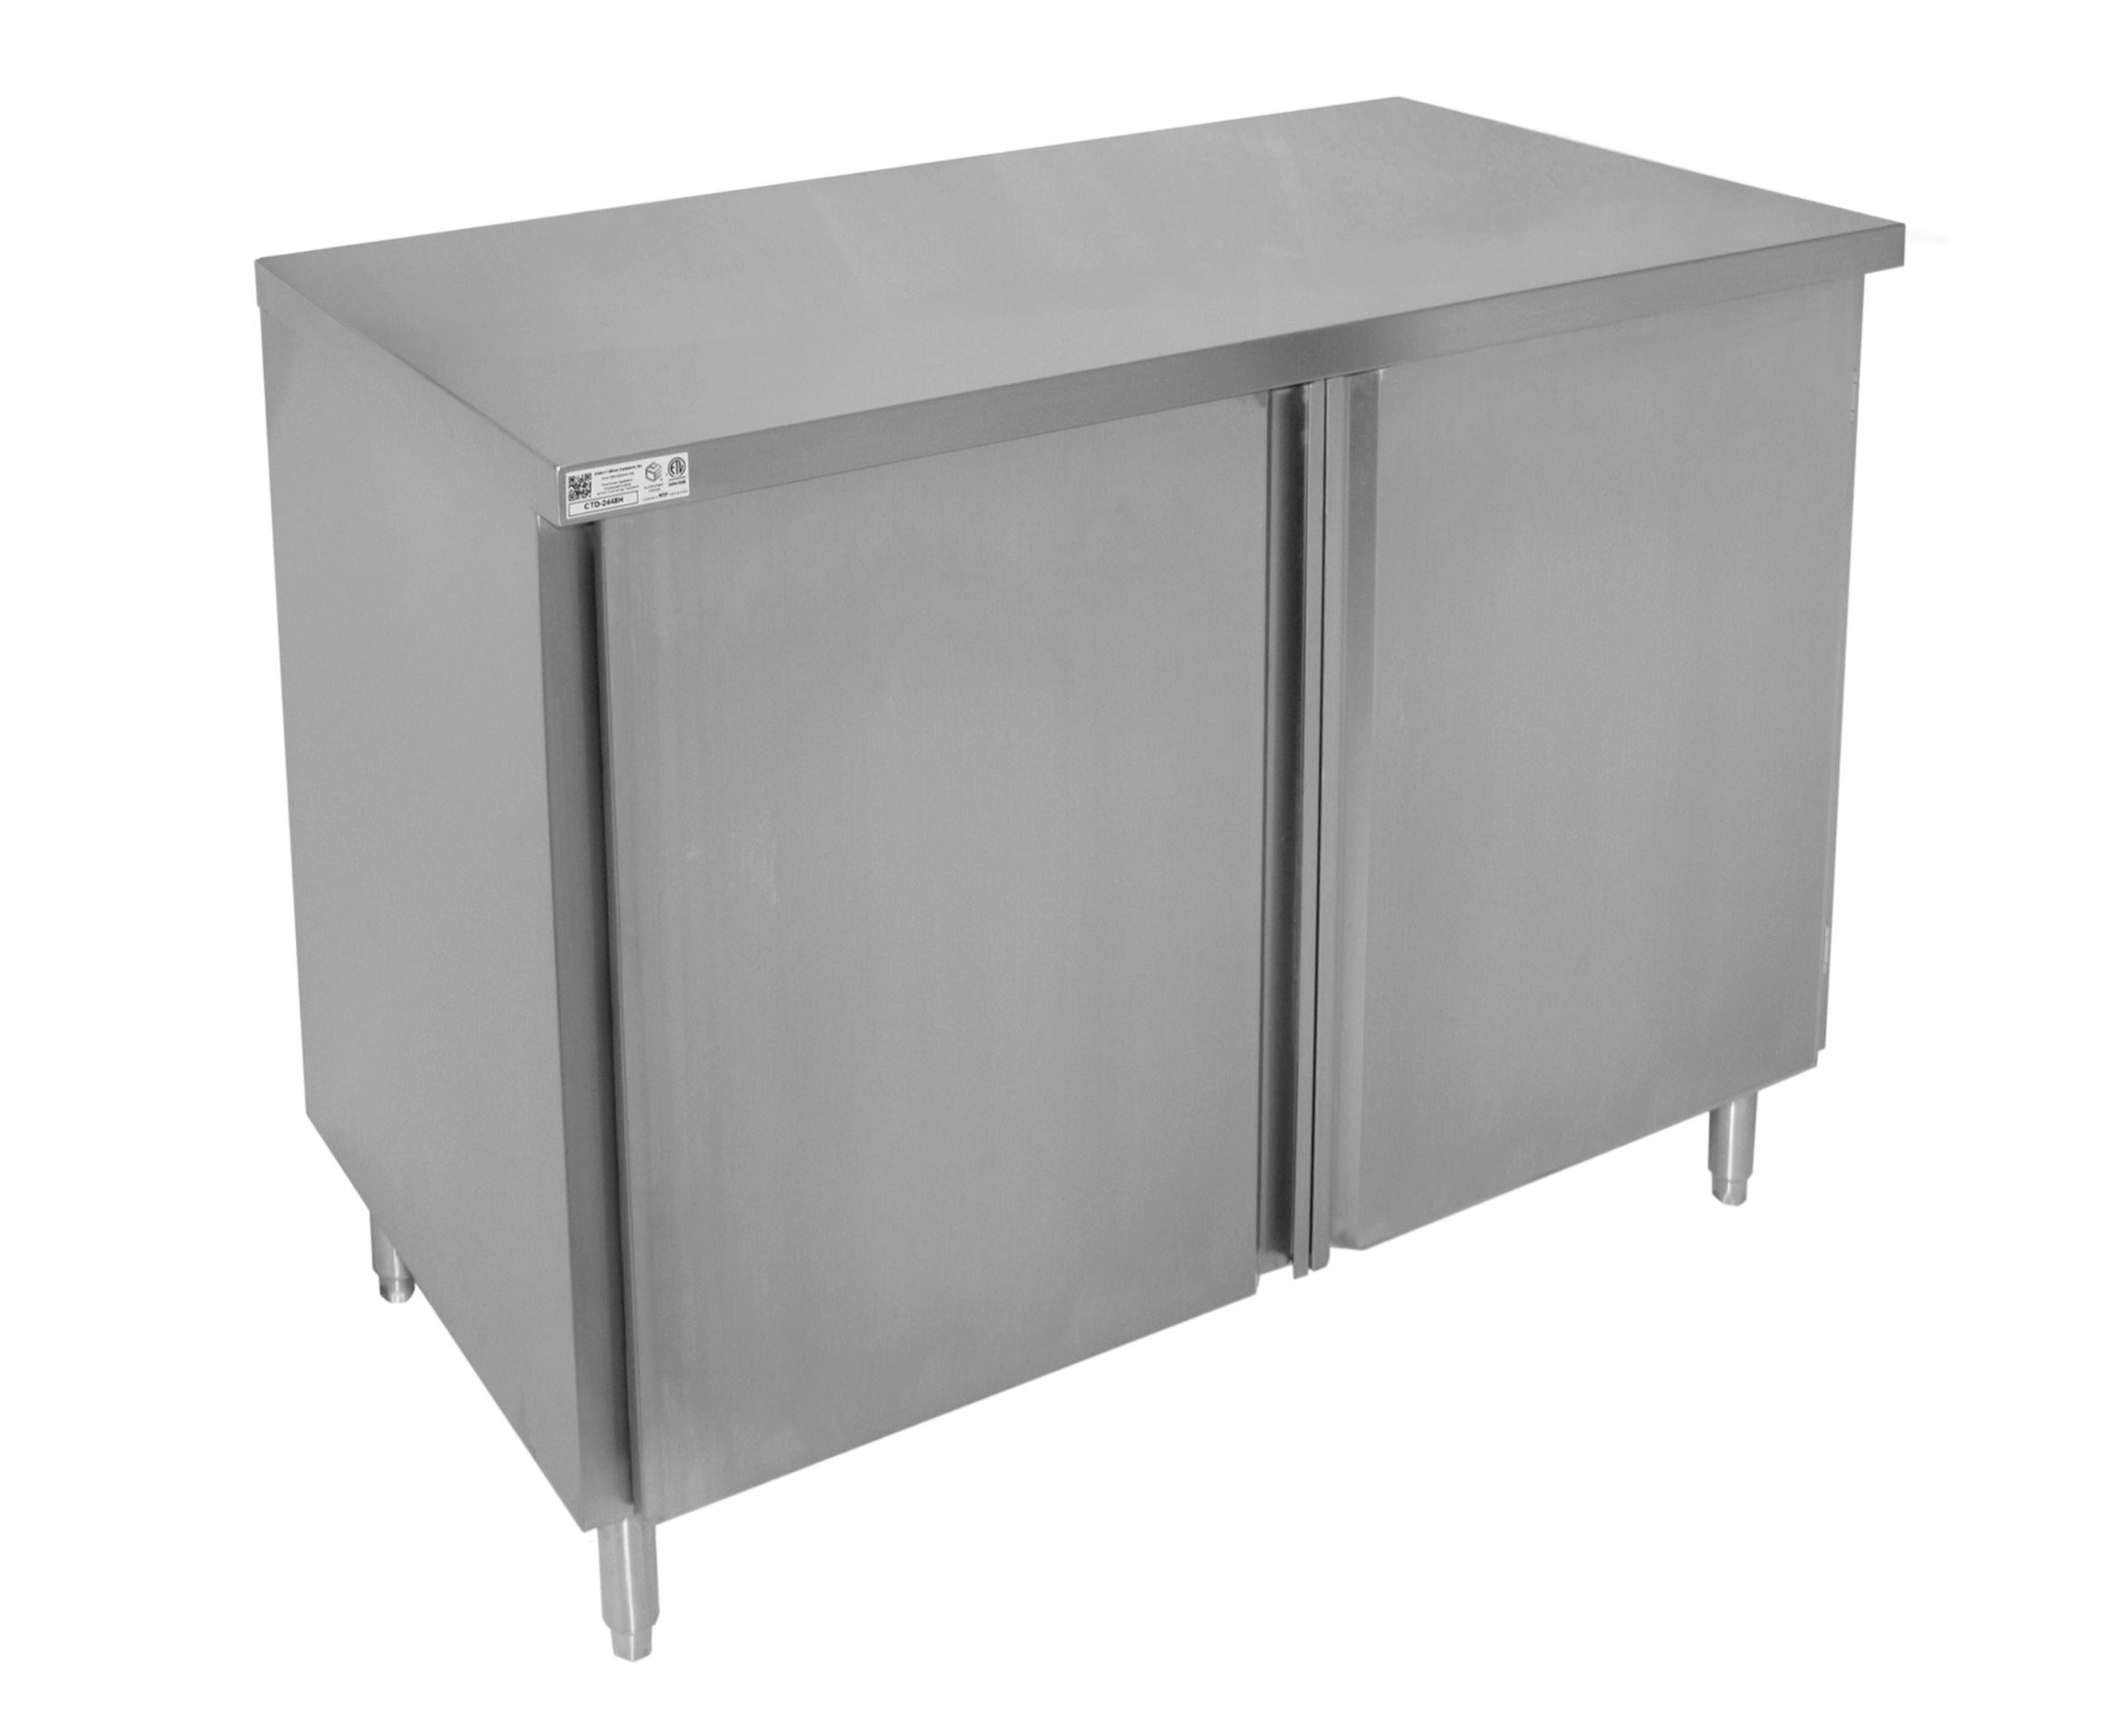 GSW 18 Gauge Flat Top All Stainless Steel Cabinet Enclosed Work Table w/Hinged Door 24"(W) x 36"(L) x 35"(H)